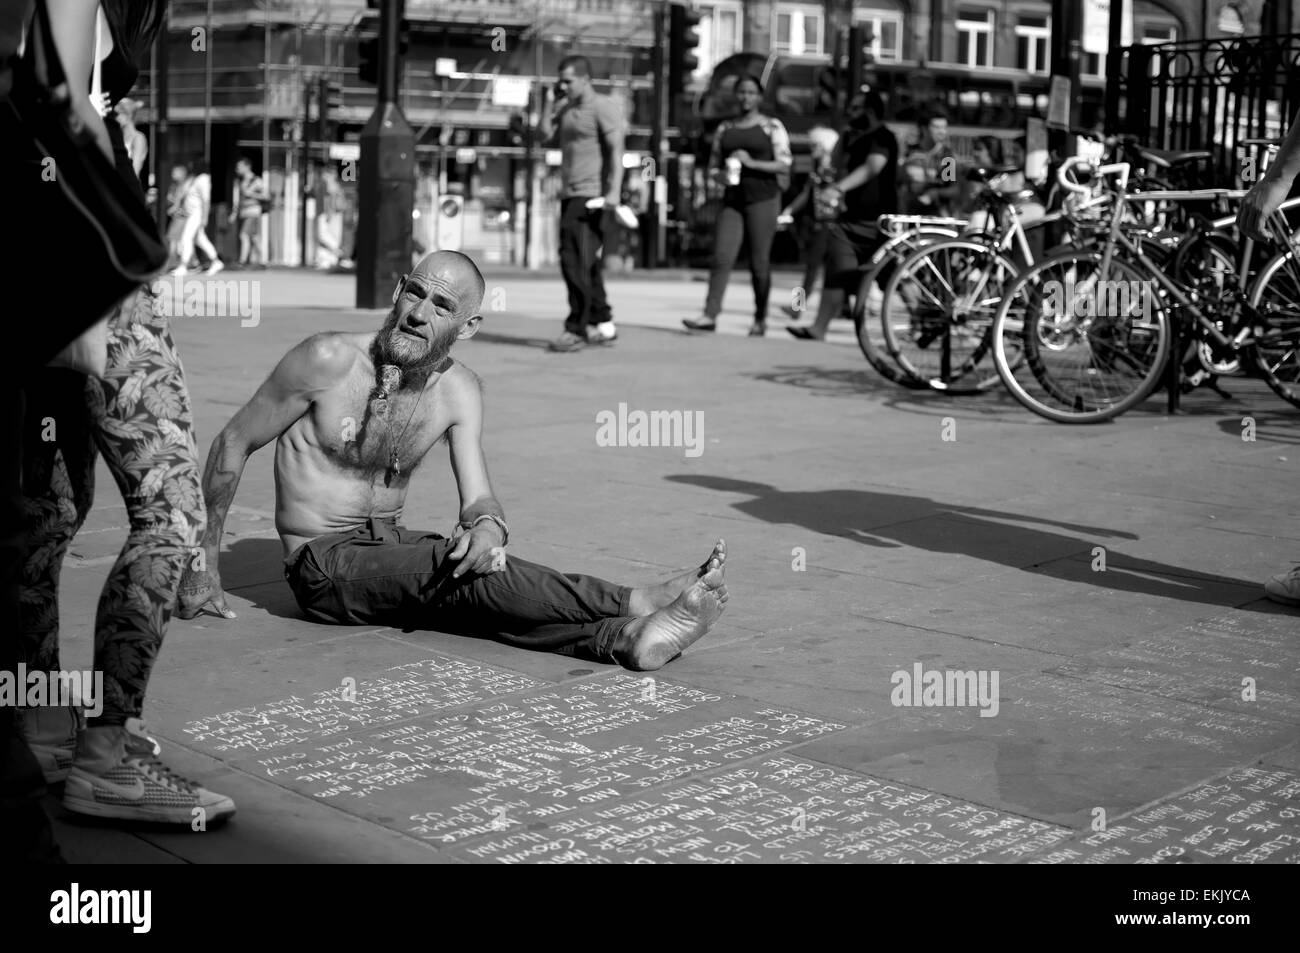 A street performer captured while talking to a passerby Stock Photo